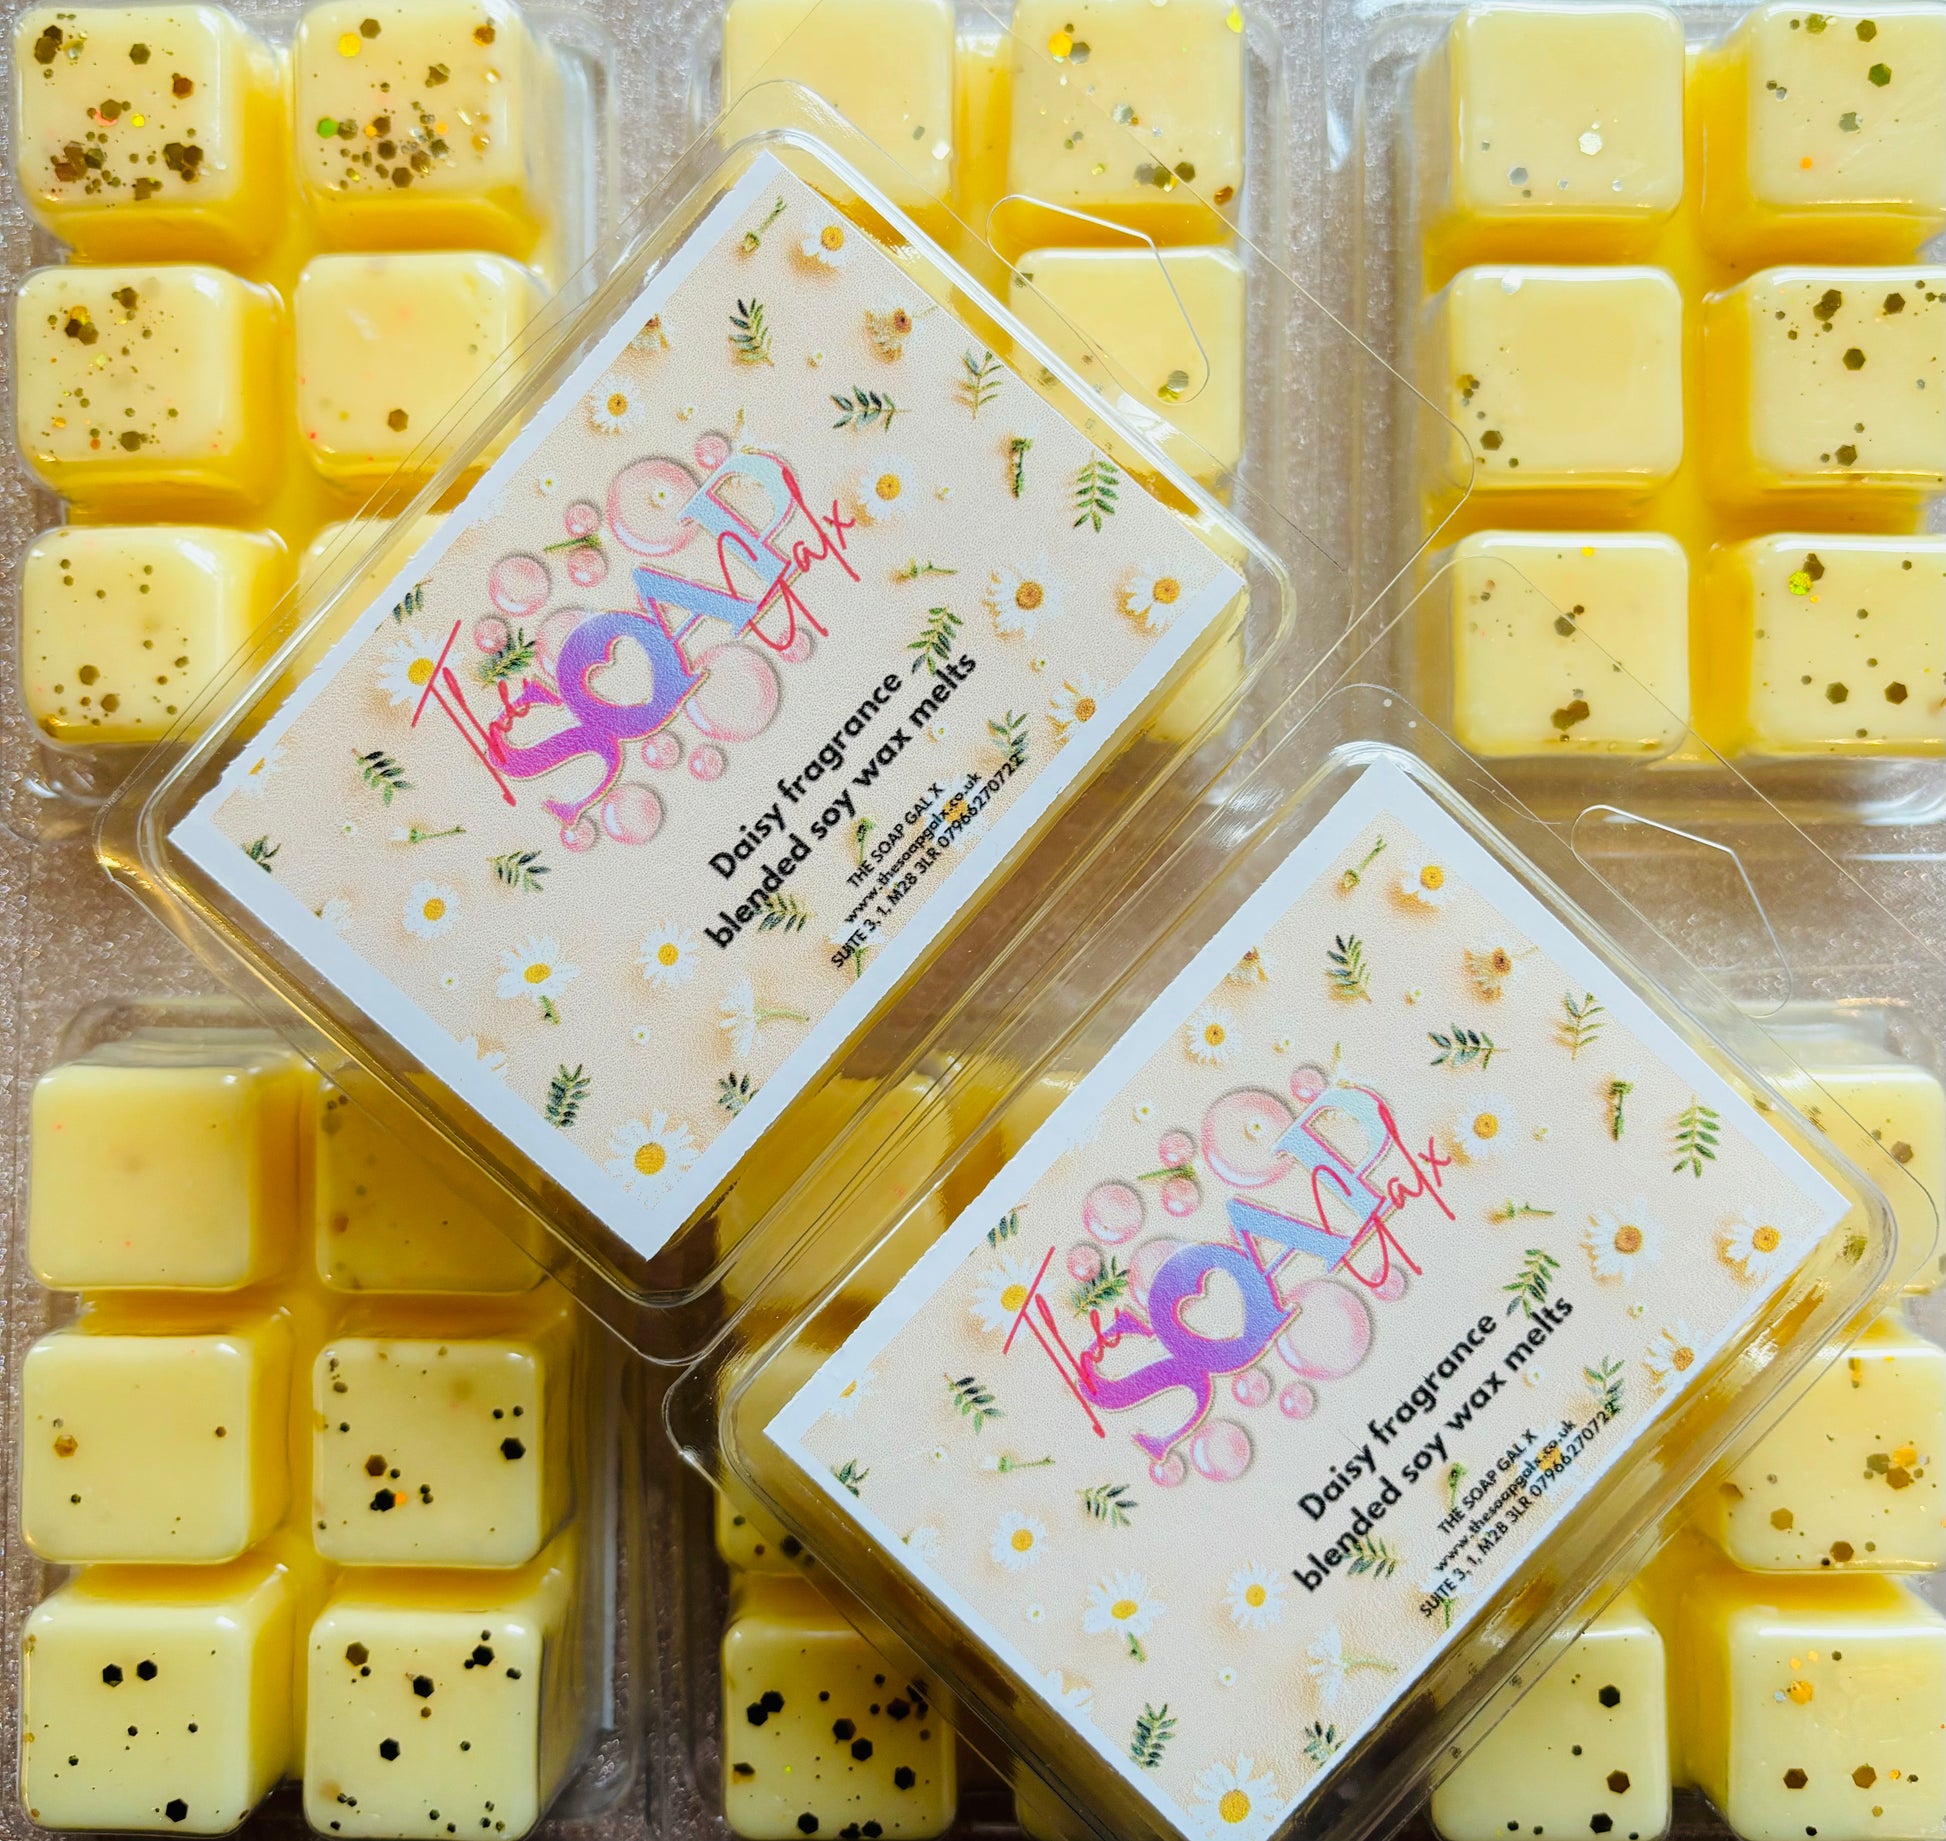 Discover the sublime fragrance of Daisie Perfume Inspired Soy Wax Melts, expertly crafted with the finest ingredients by The Soap Gal x to release a captivating scent in any space. Indulge in the alluring aromas offered by our premium Daisie Perfume Inspired Soy Wax Melts.